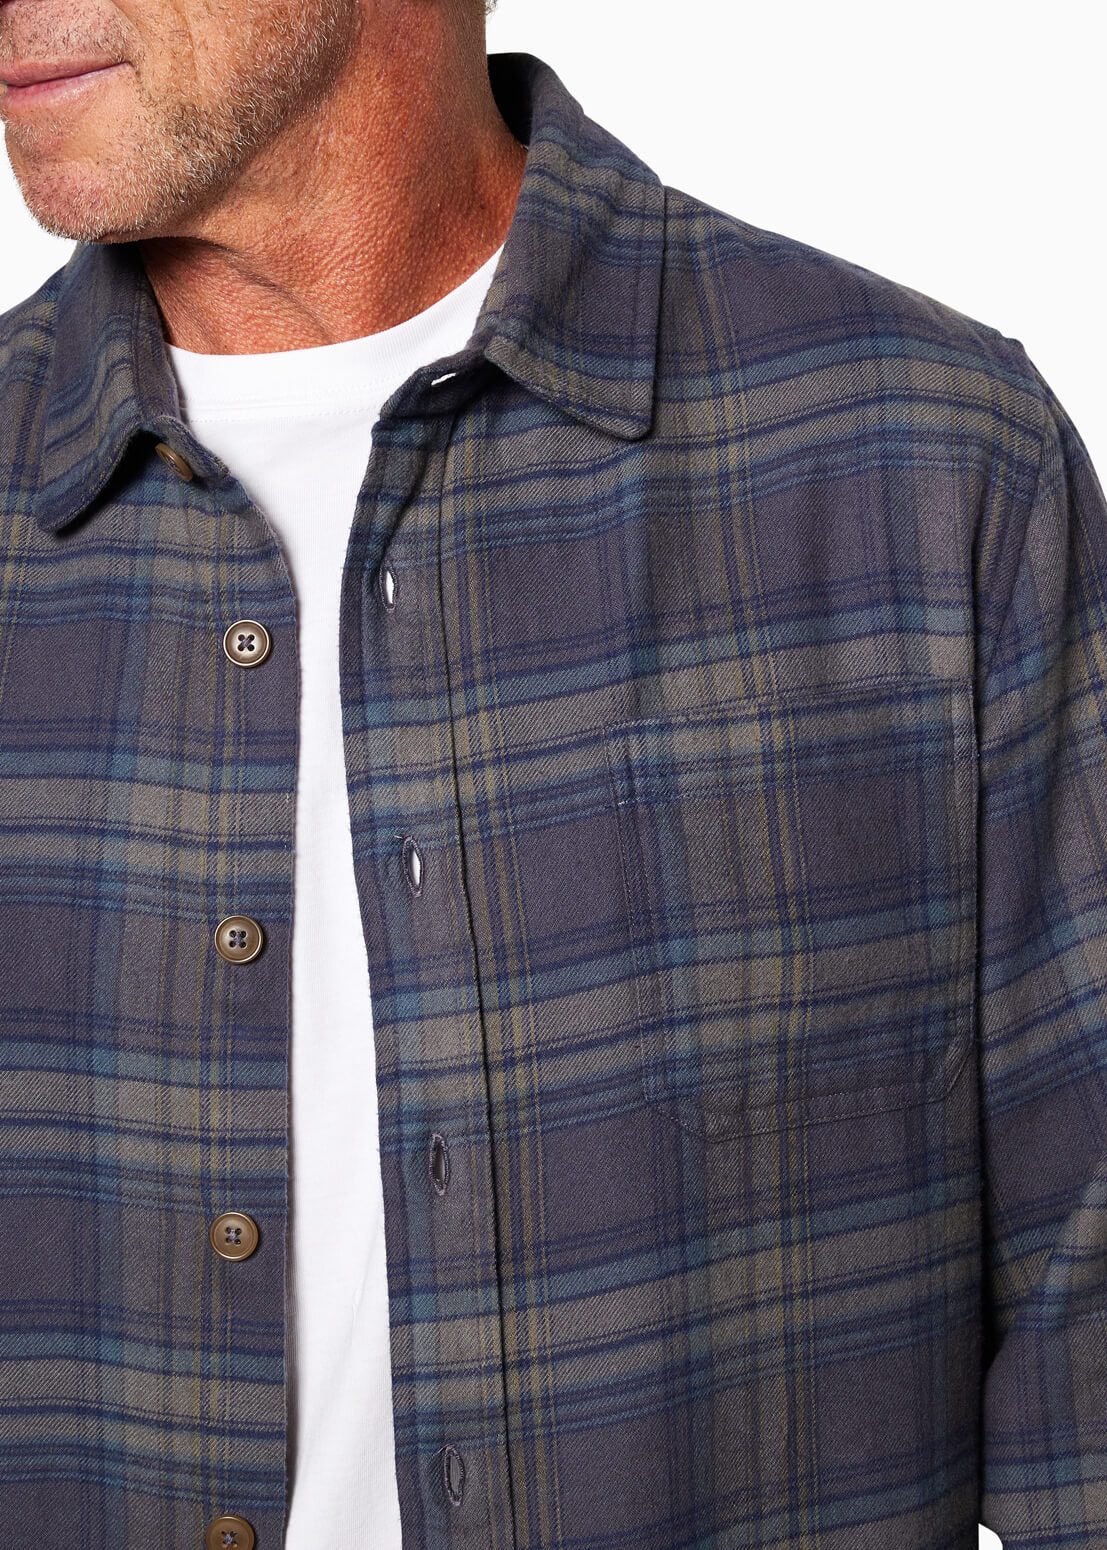 Atwater | Flannel Shirt detail #color_charcoal